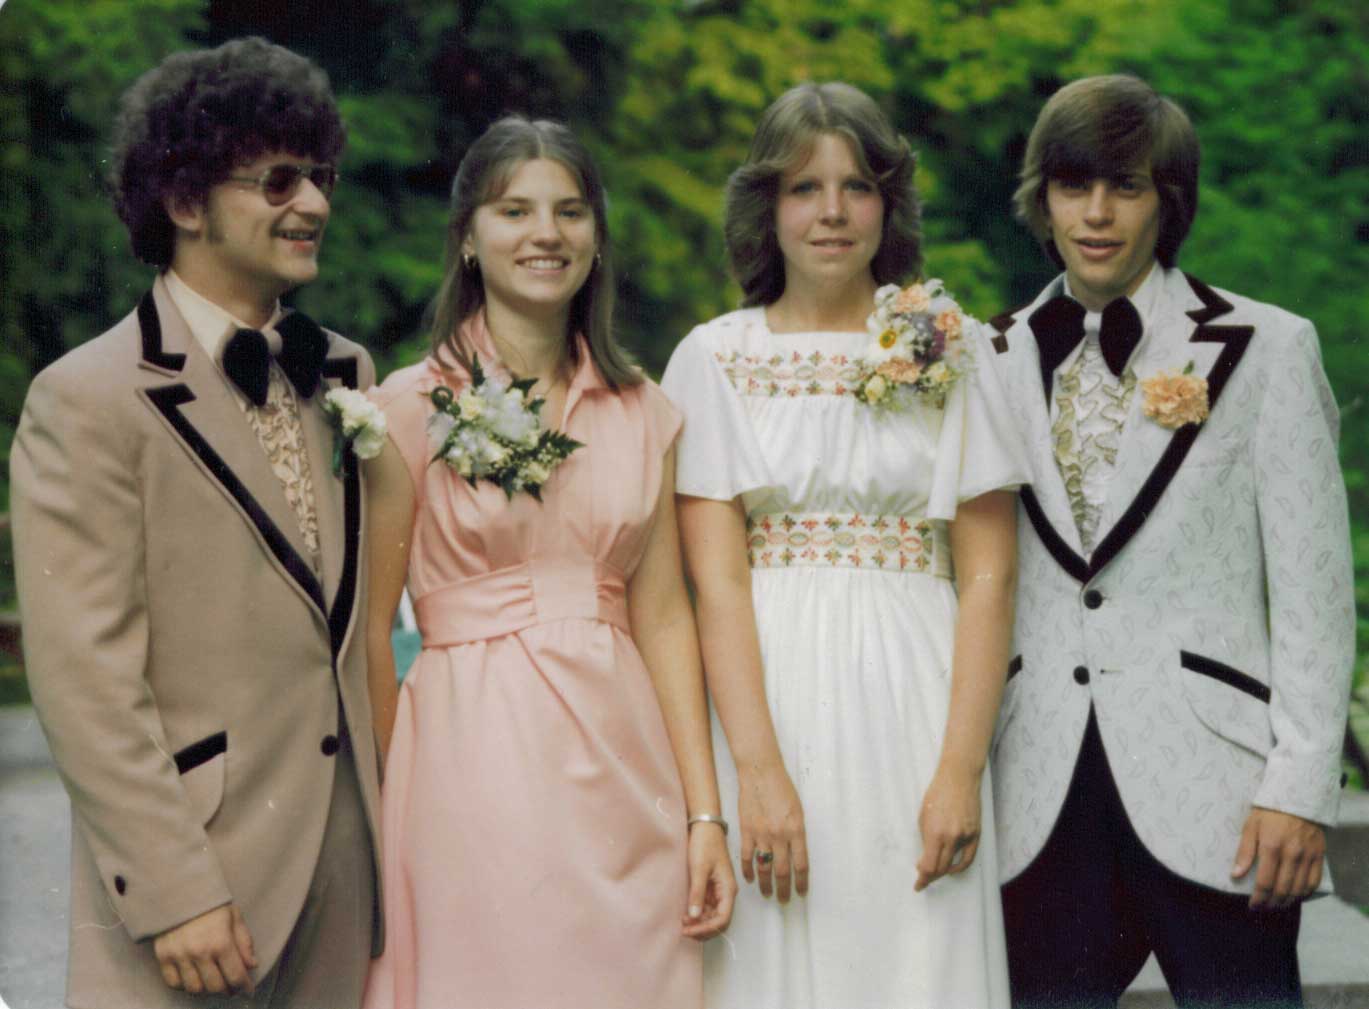 I have to smile when I look at photos from my own prom-going history. 